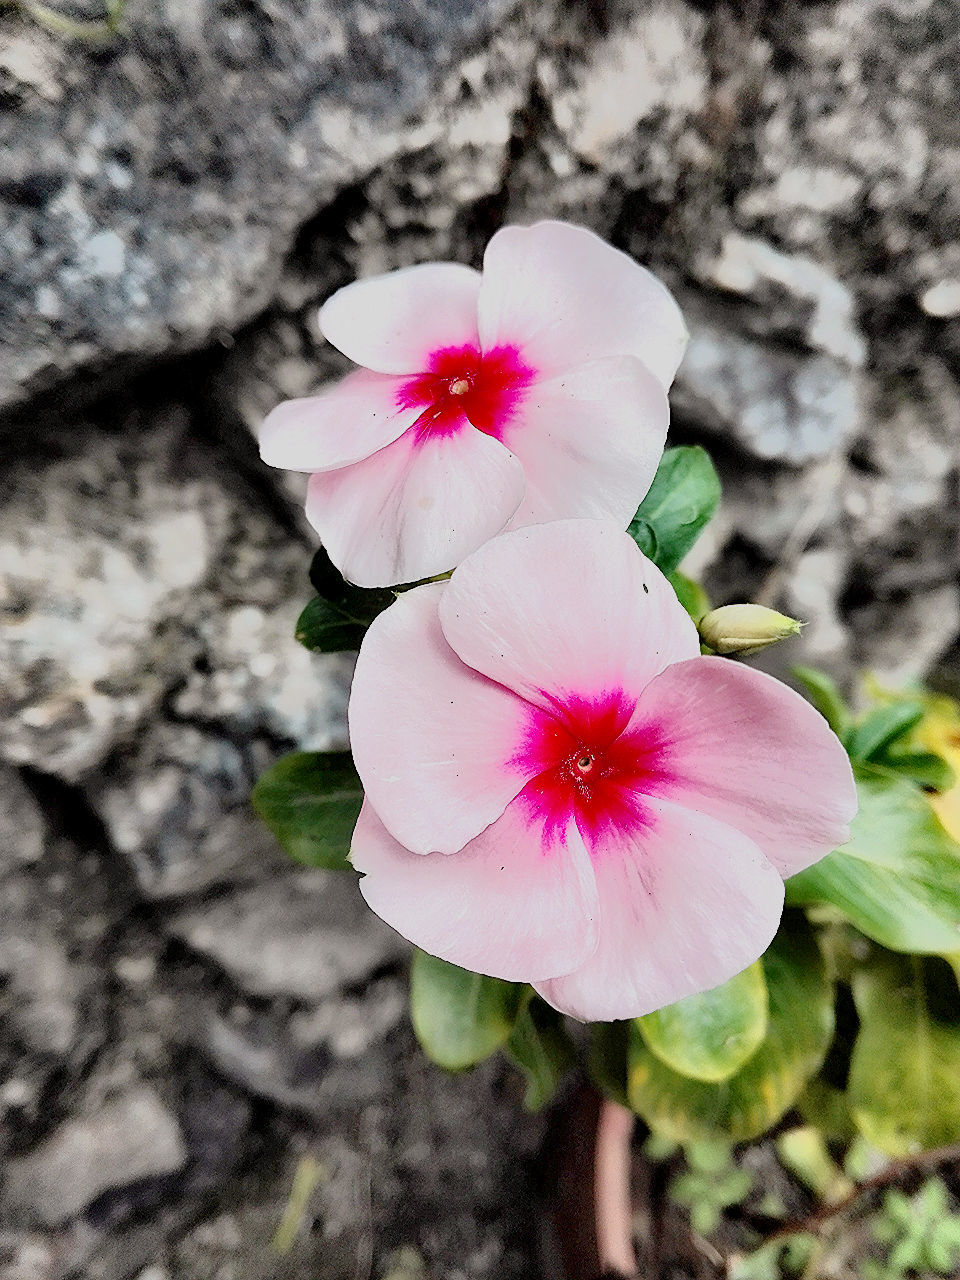 CLOSE-UP OF PINK FLOWER BLOOMING